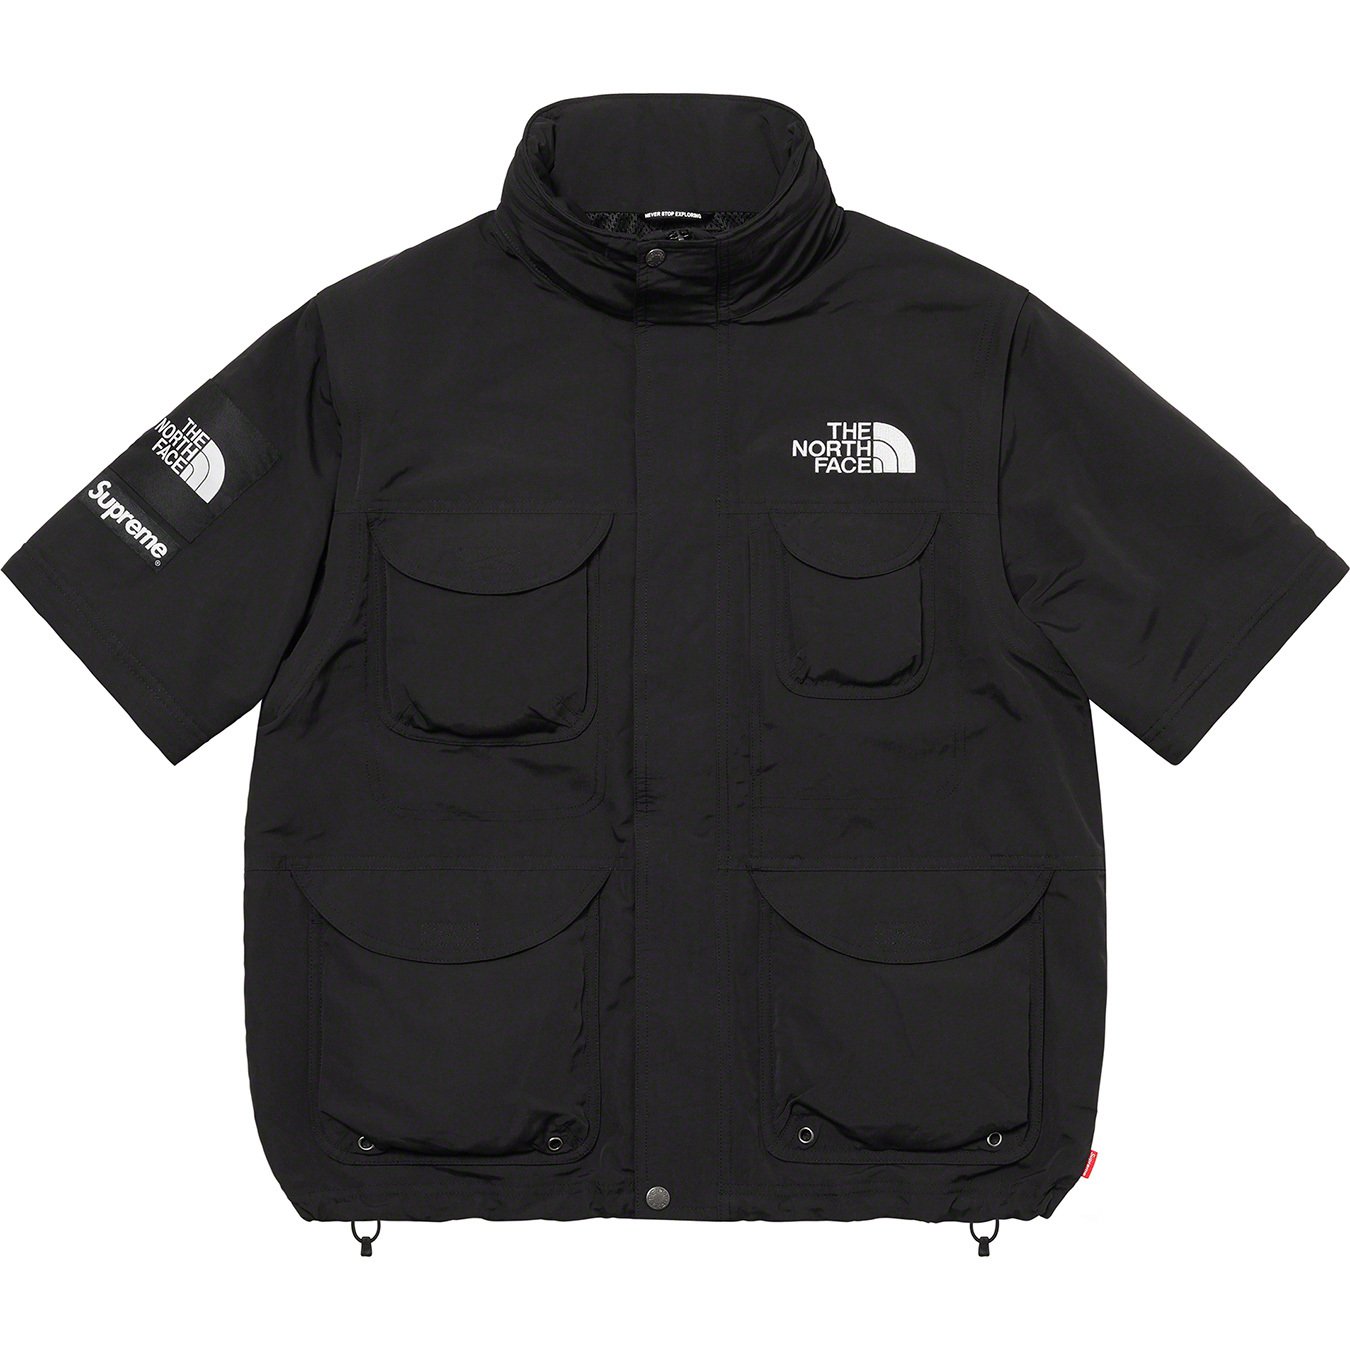 The North Face Trekking Convertible Jacket - spring summer 2022 - Supreme